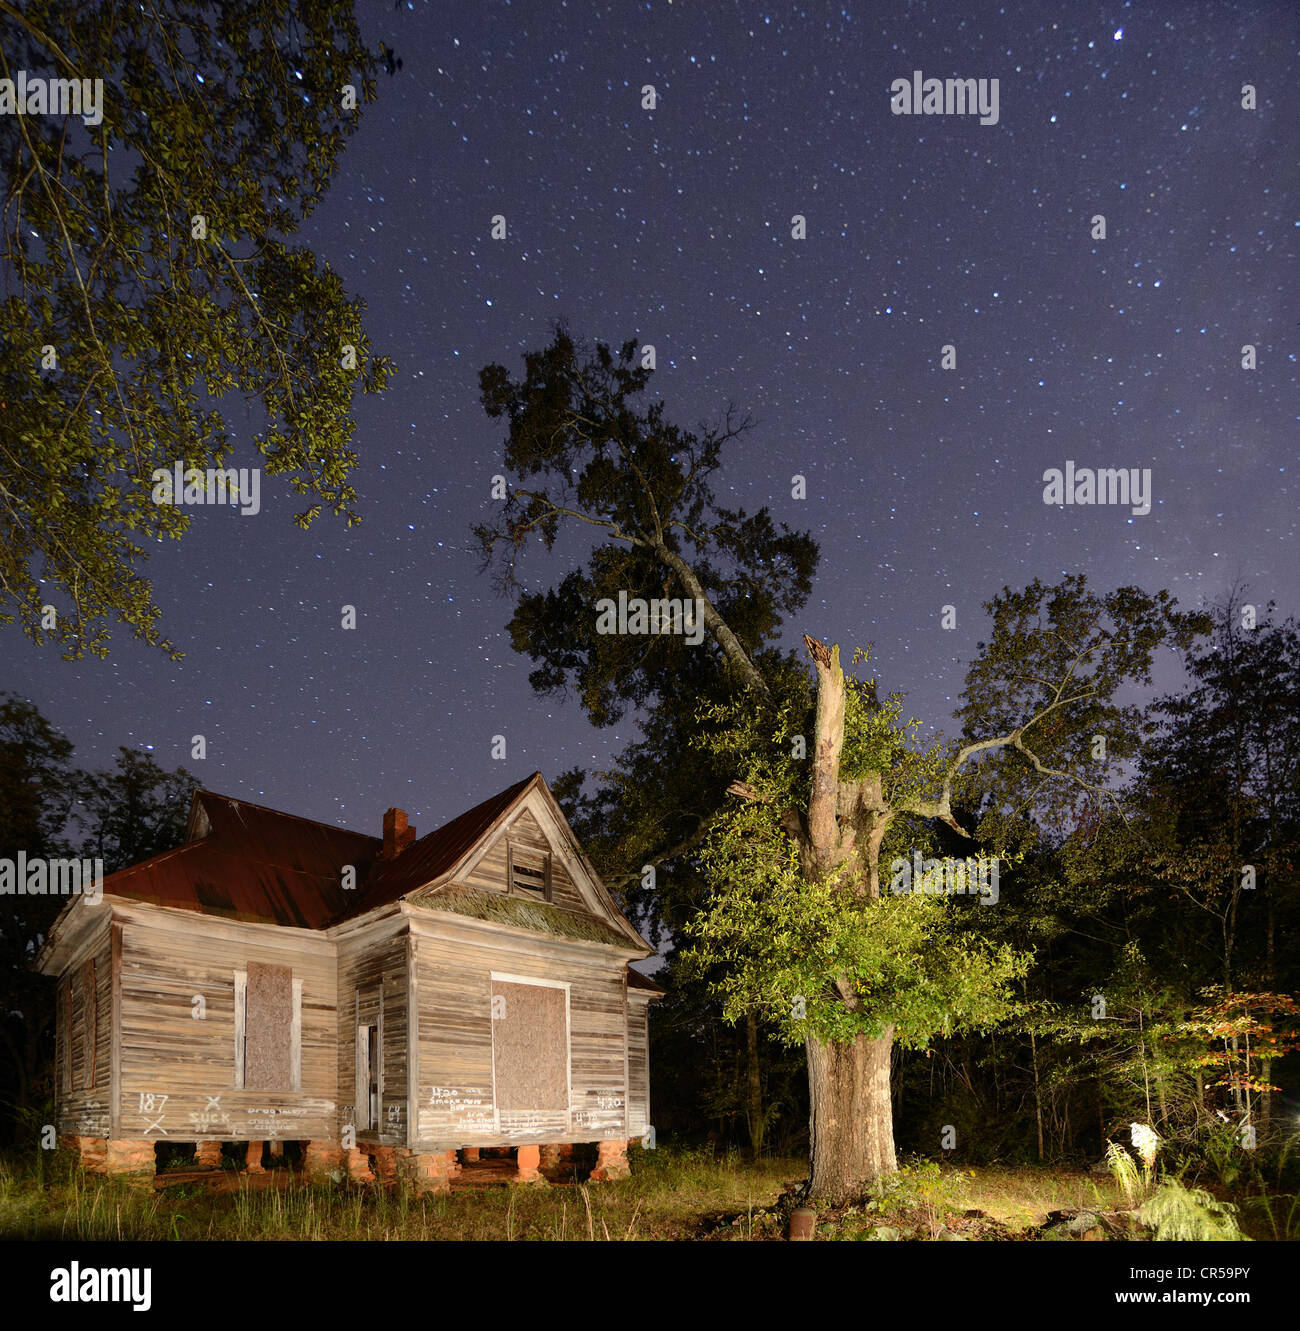 A scary abandoned house under a starry sky Stock Photo